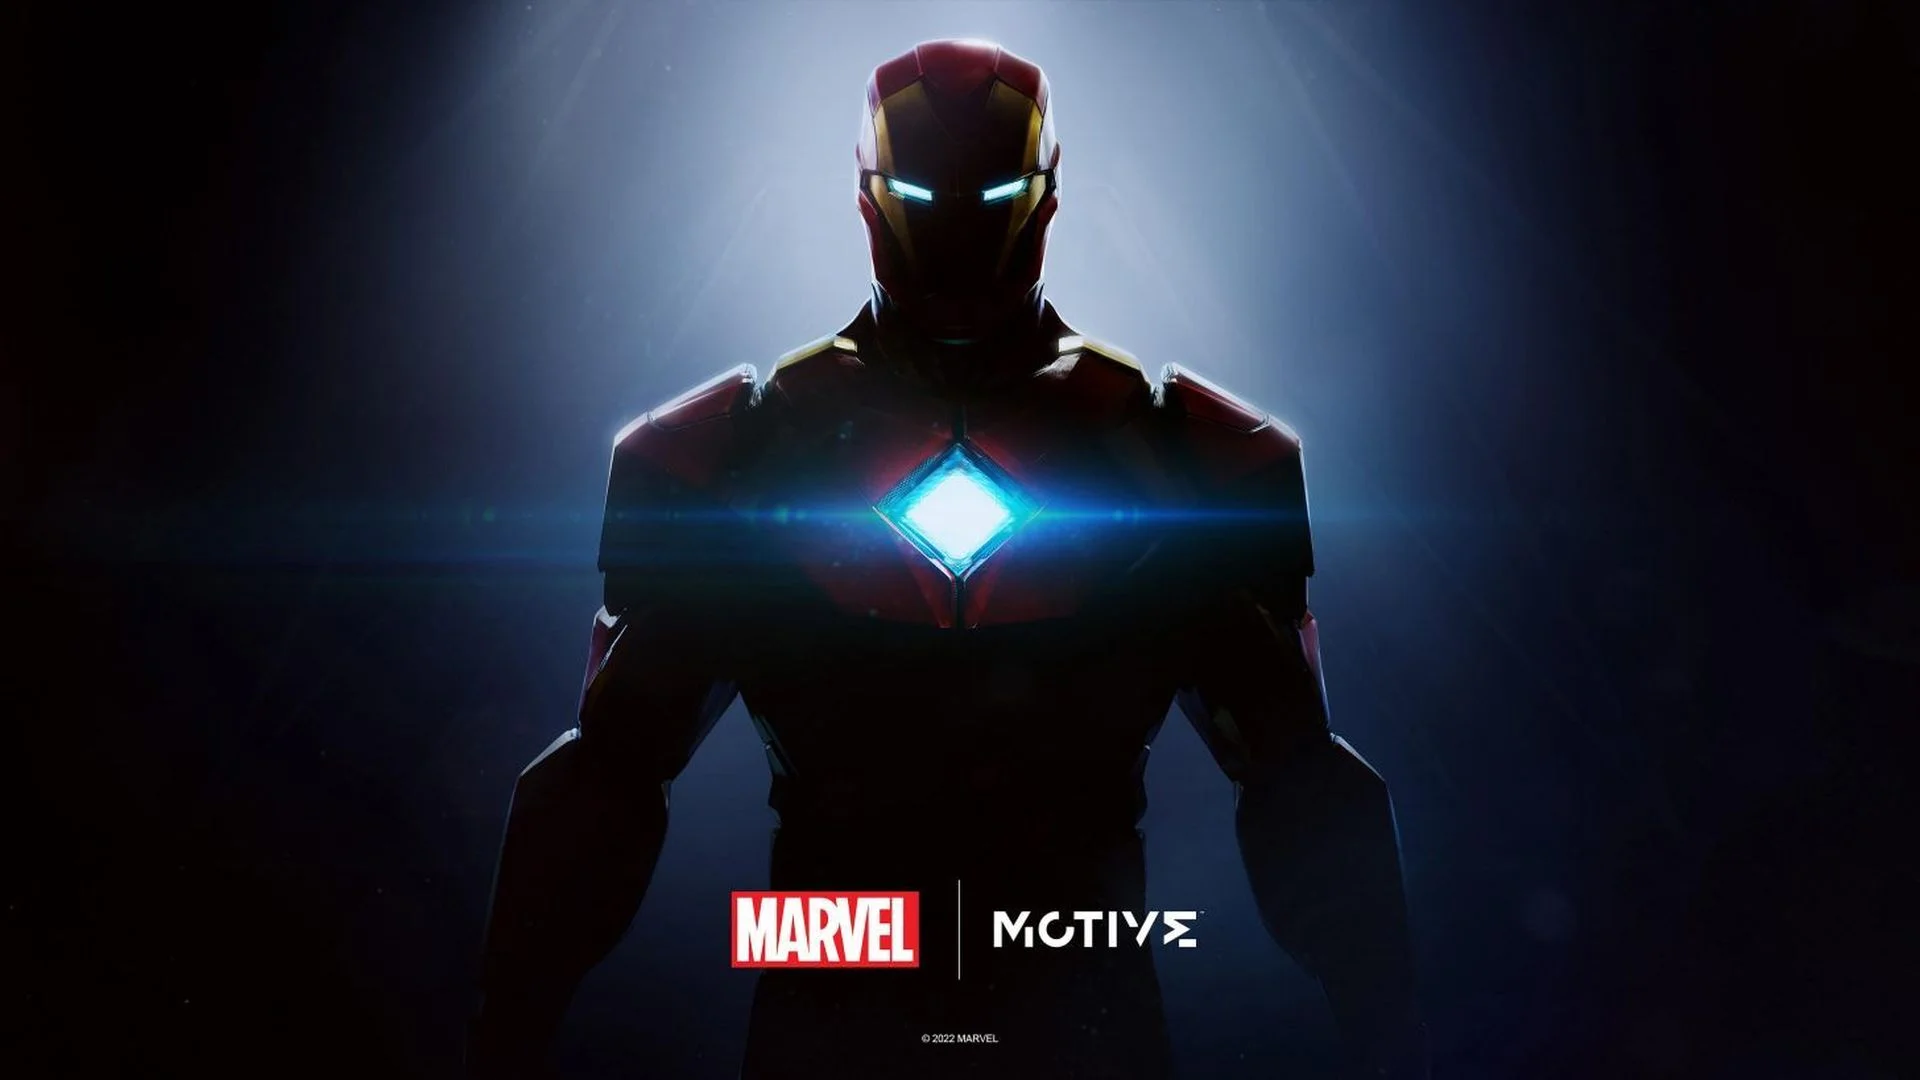 Iron Man game will get Unreal Engine 5